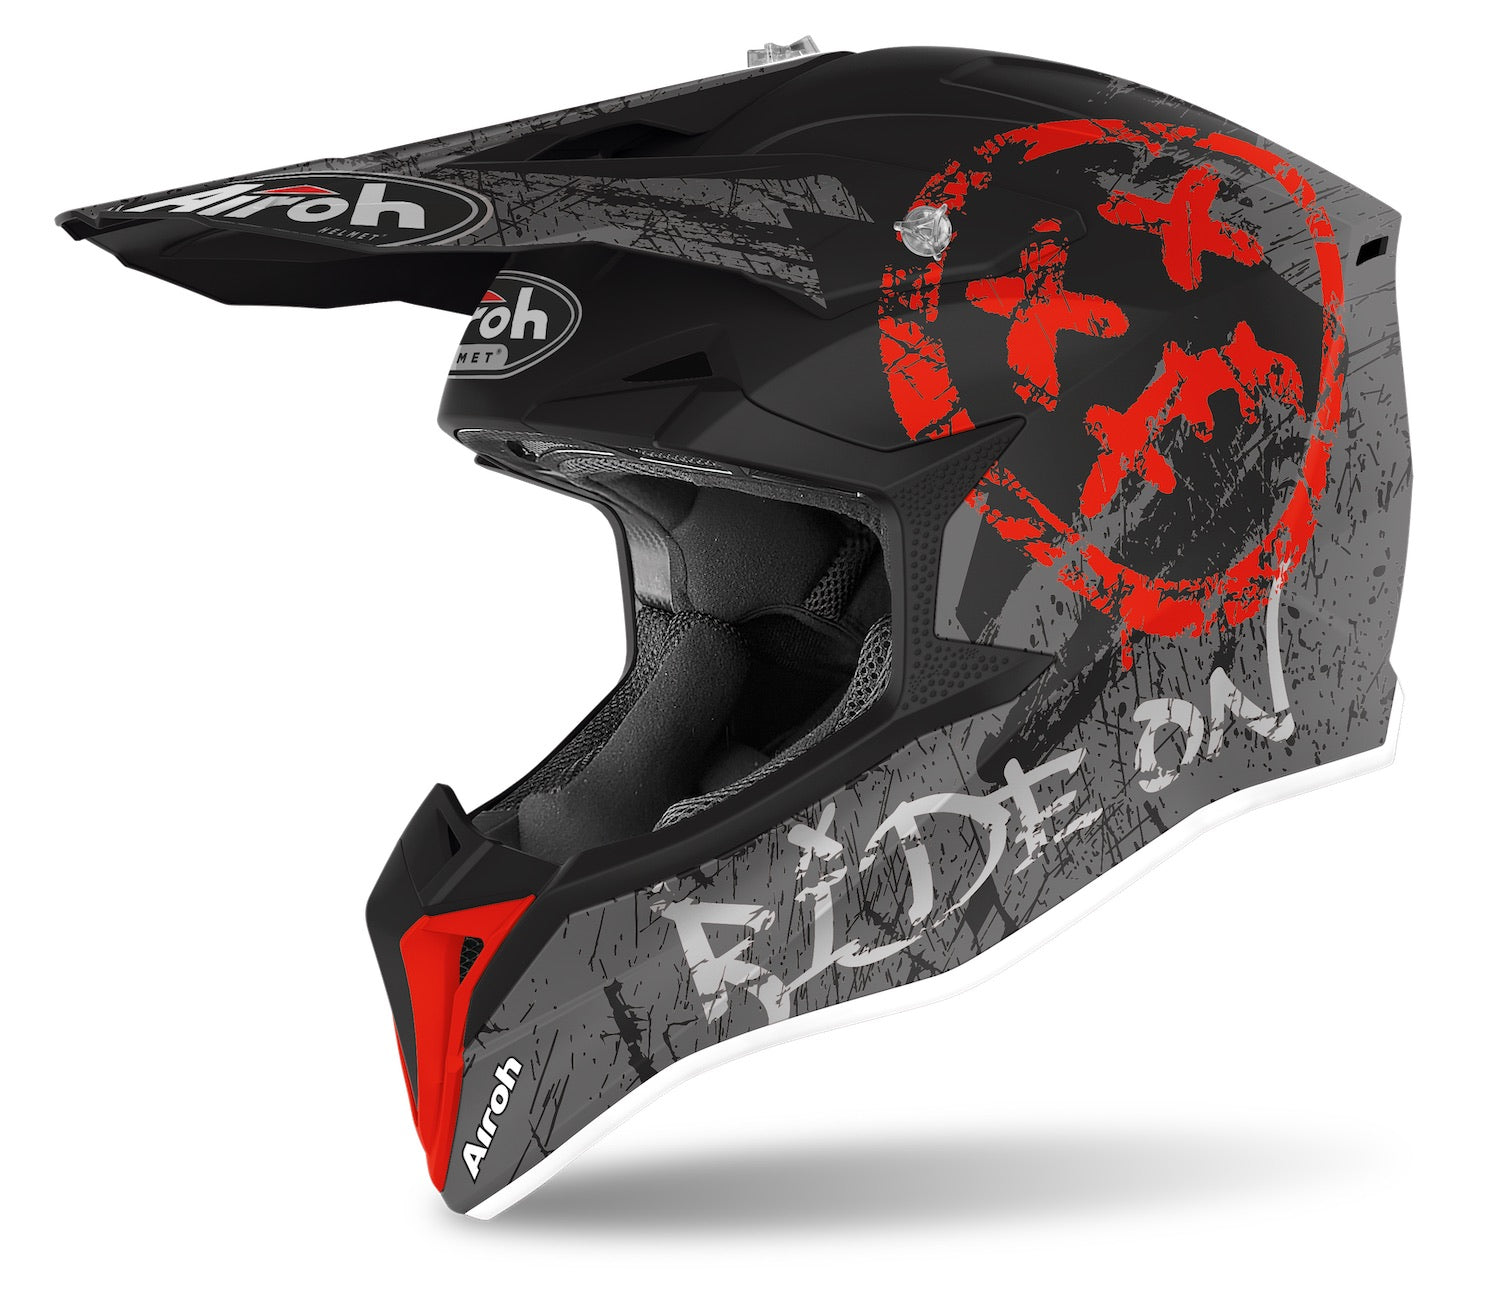 AIROH WRAAP YOUTH CASCO MOTO OFF-ROAD WRSM55Y SMILE ROSSO MATTO XXS 